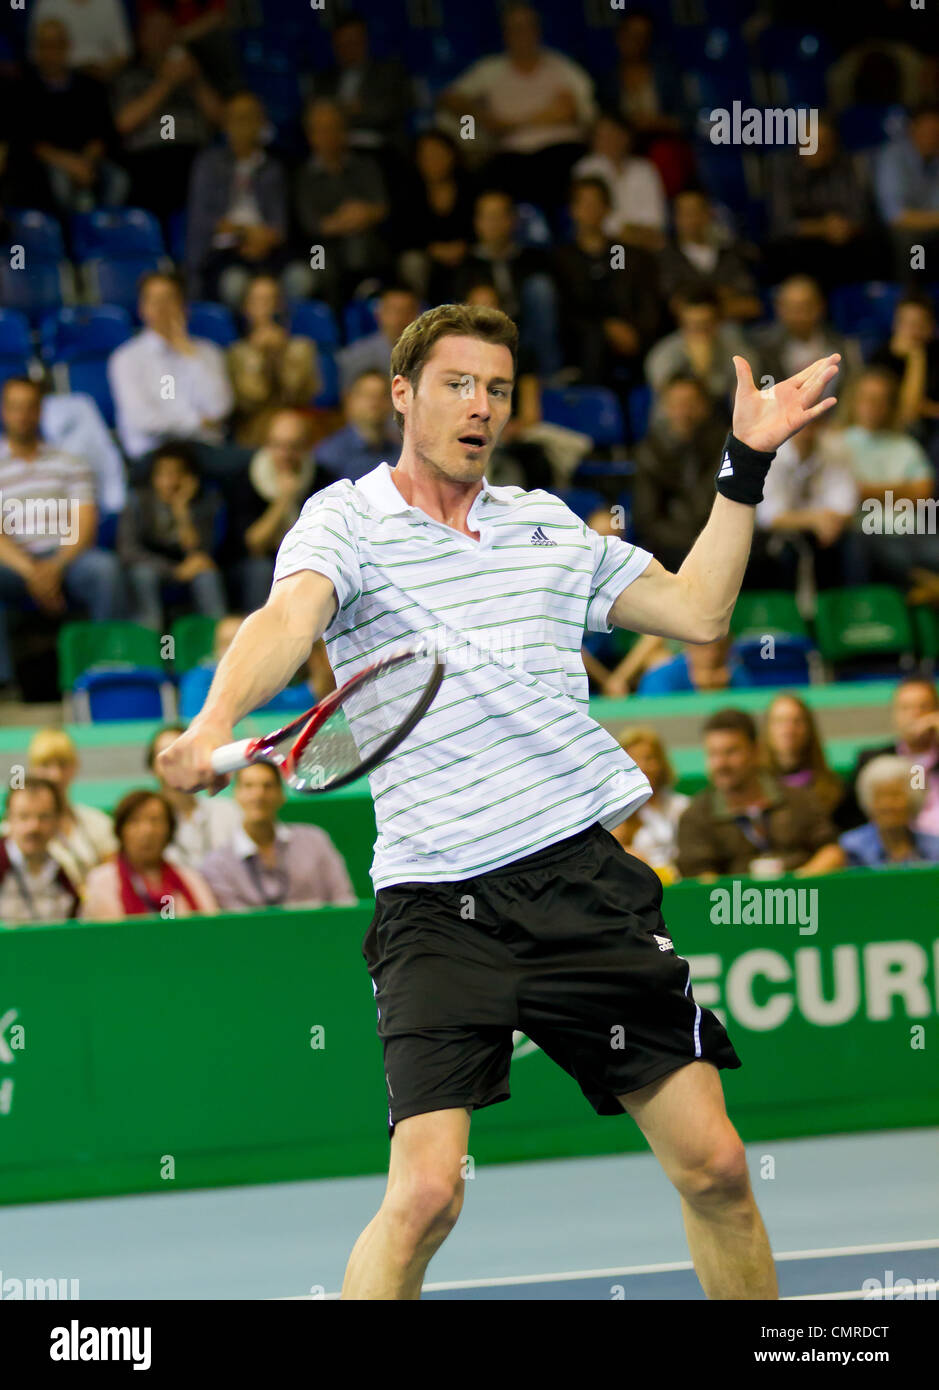 Marat Safin plays tennis for 3rd place at BNP Paribas Open Champions Tour against Mark Philippoussis in Zurich, SUI Stock Photo